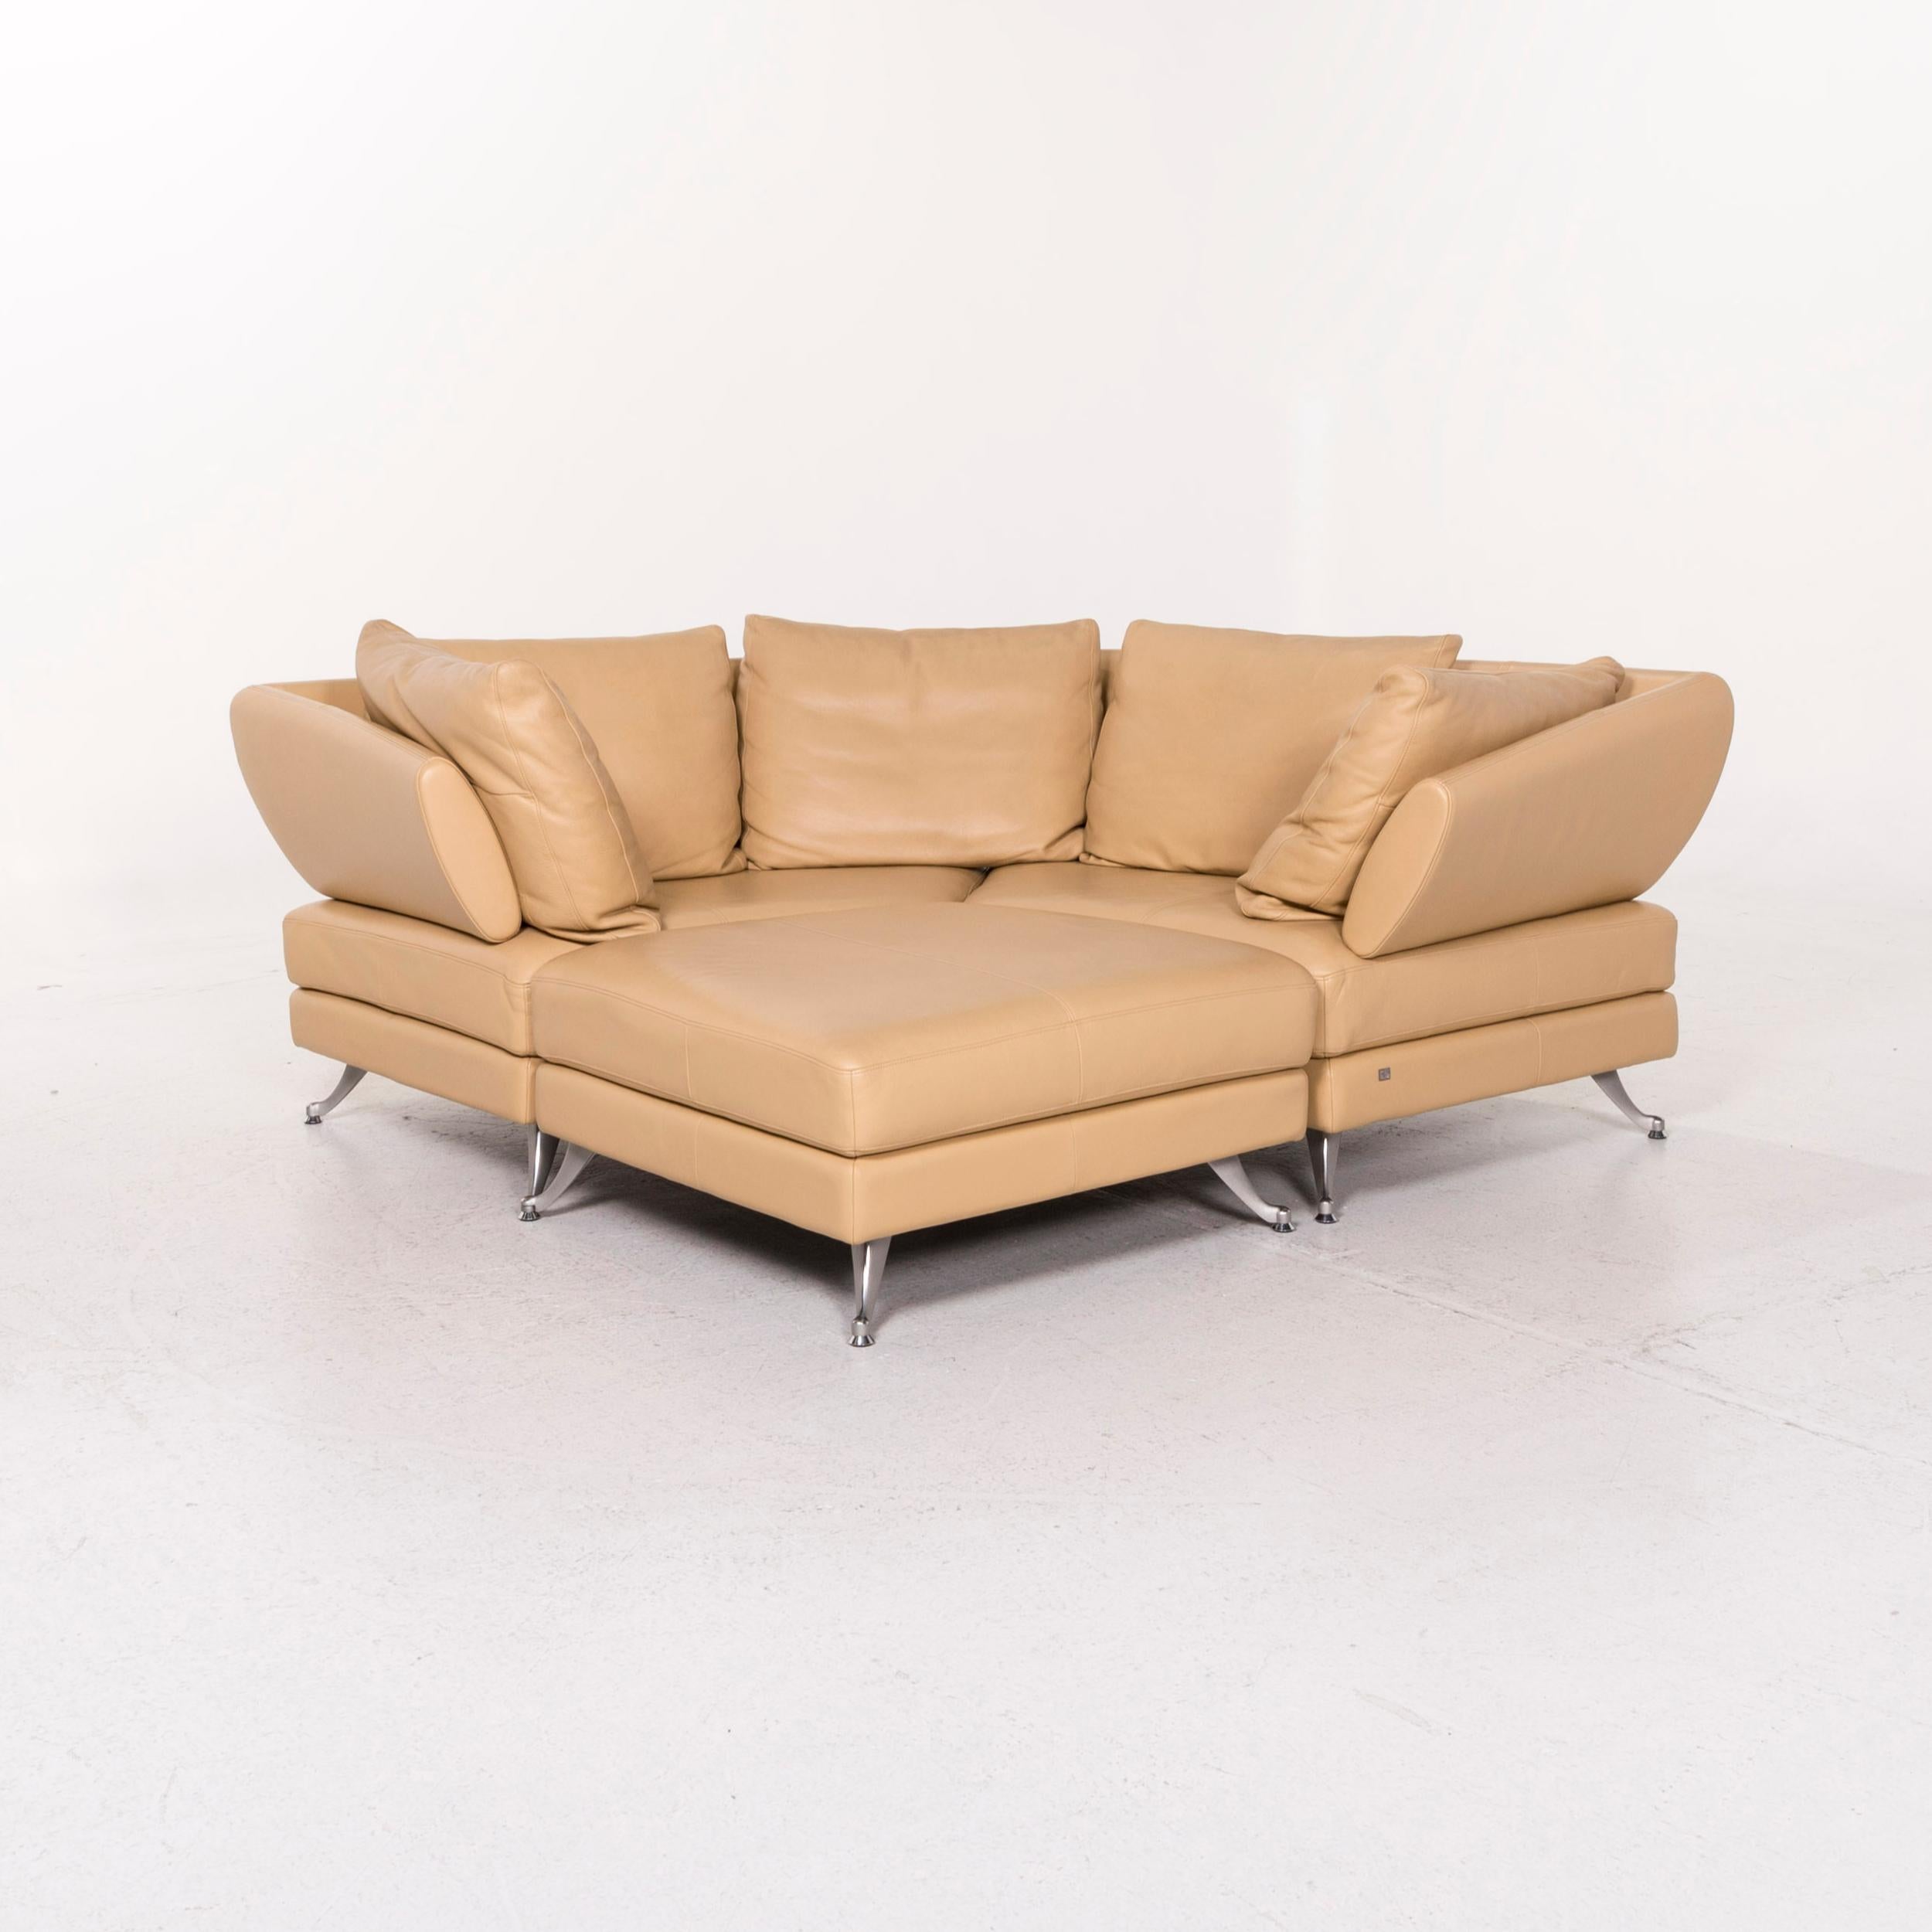 We bring to you a Rolf Benz 222 leather corner sofa beige sofa function variable modular sofa.
   
 

 Product measurements in centimeters:
 

Depth 150
Width 310
Height 80
Seat-height 40
Rest-height 70
Seat-depth 55
Seat-width